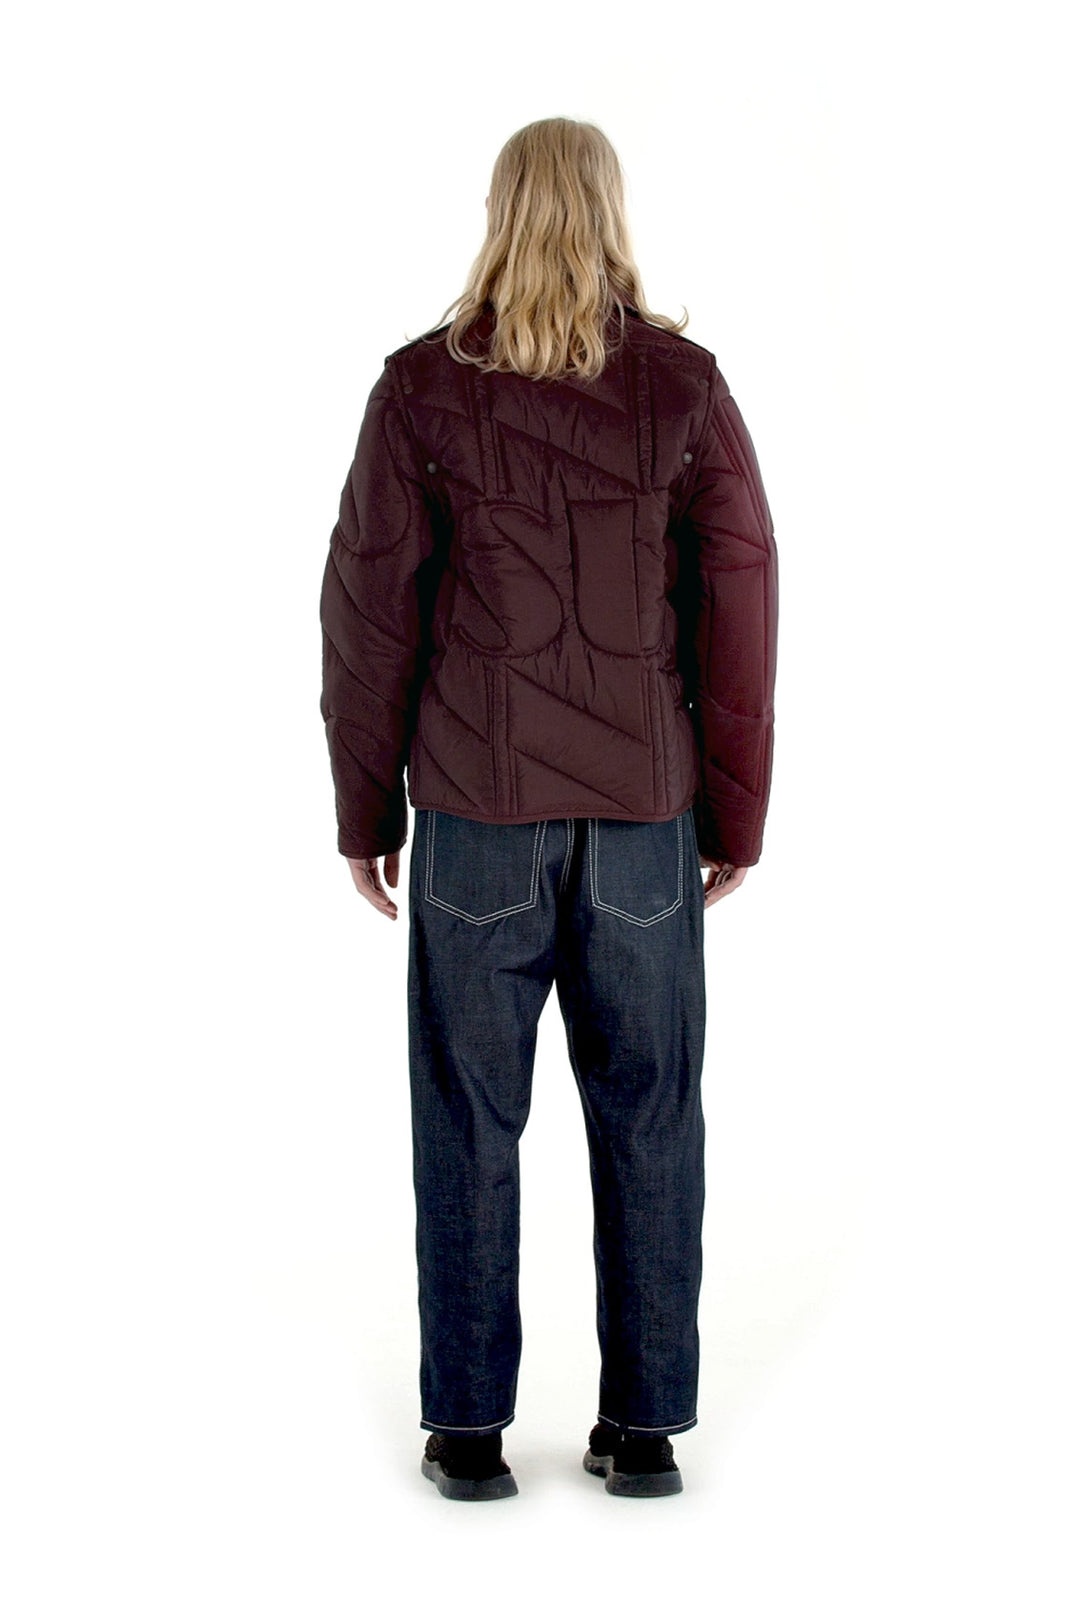 PADDED JACKET / maroon / embroidered allover logo - 4